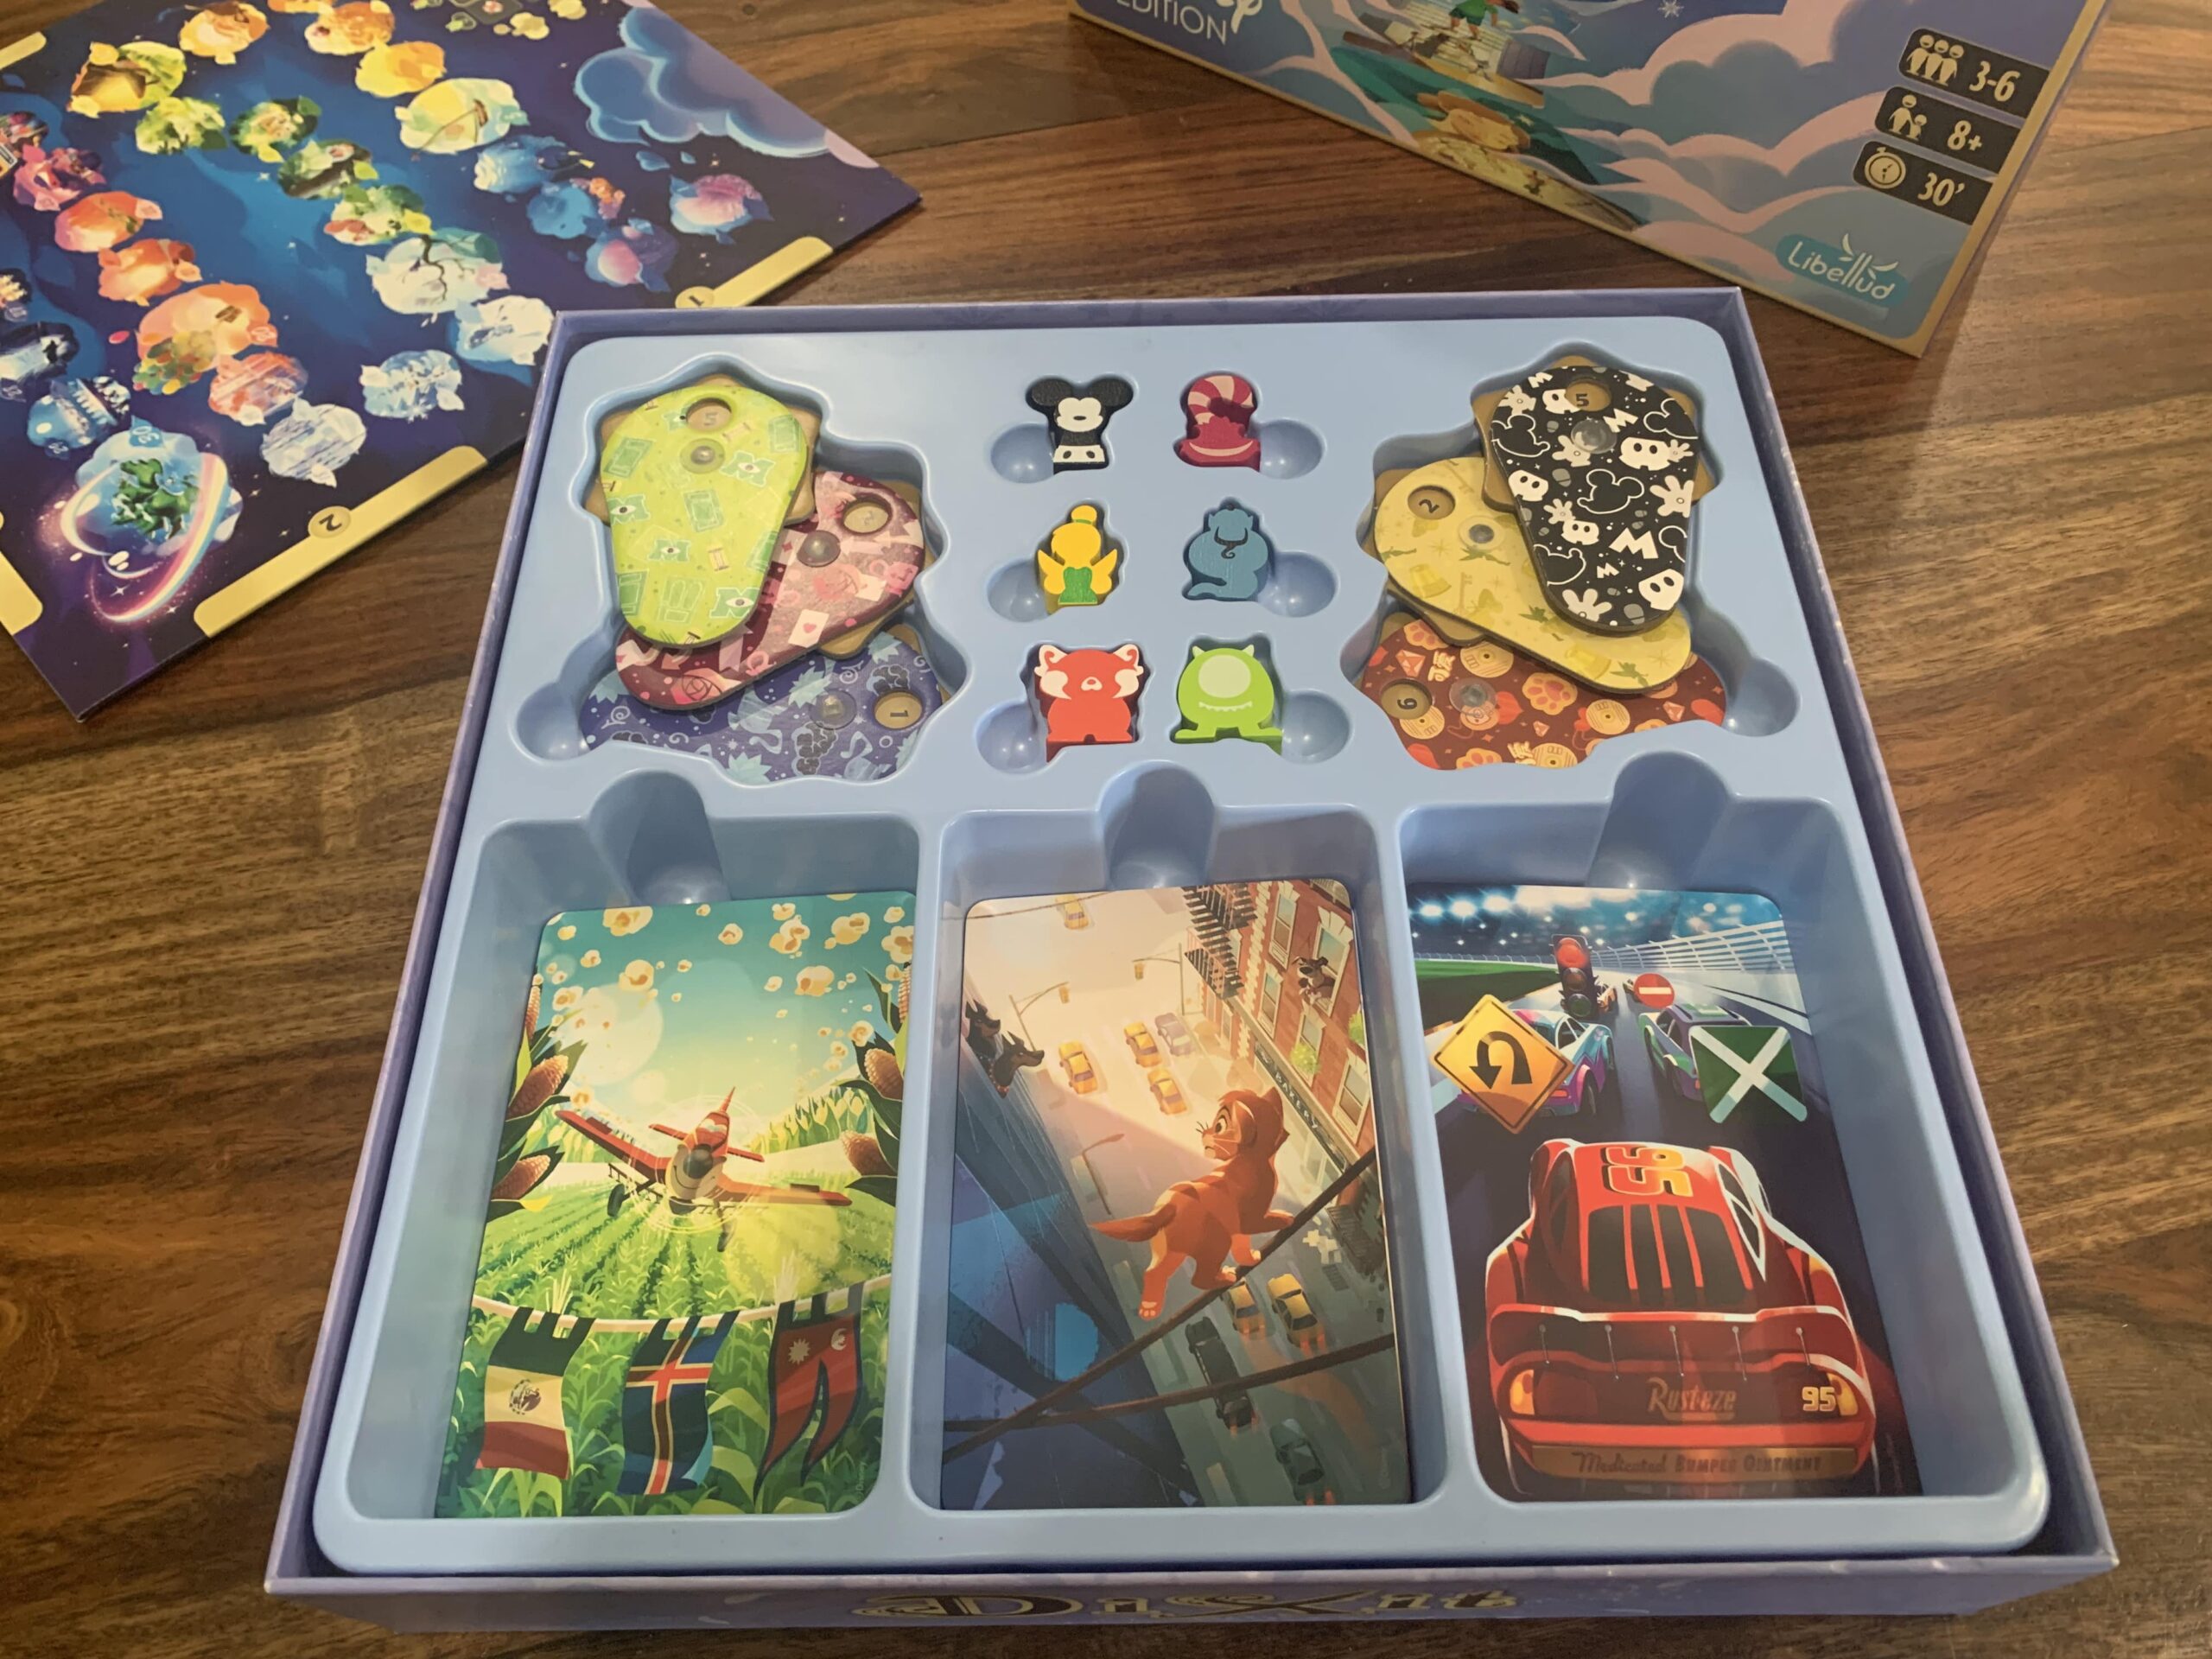 Disney Dixit Review - The Tabletop Family